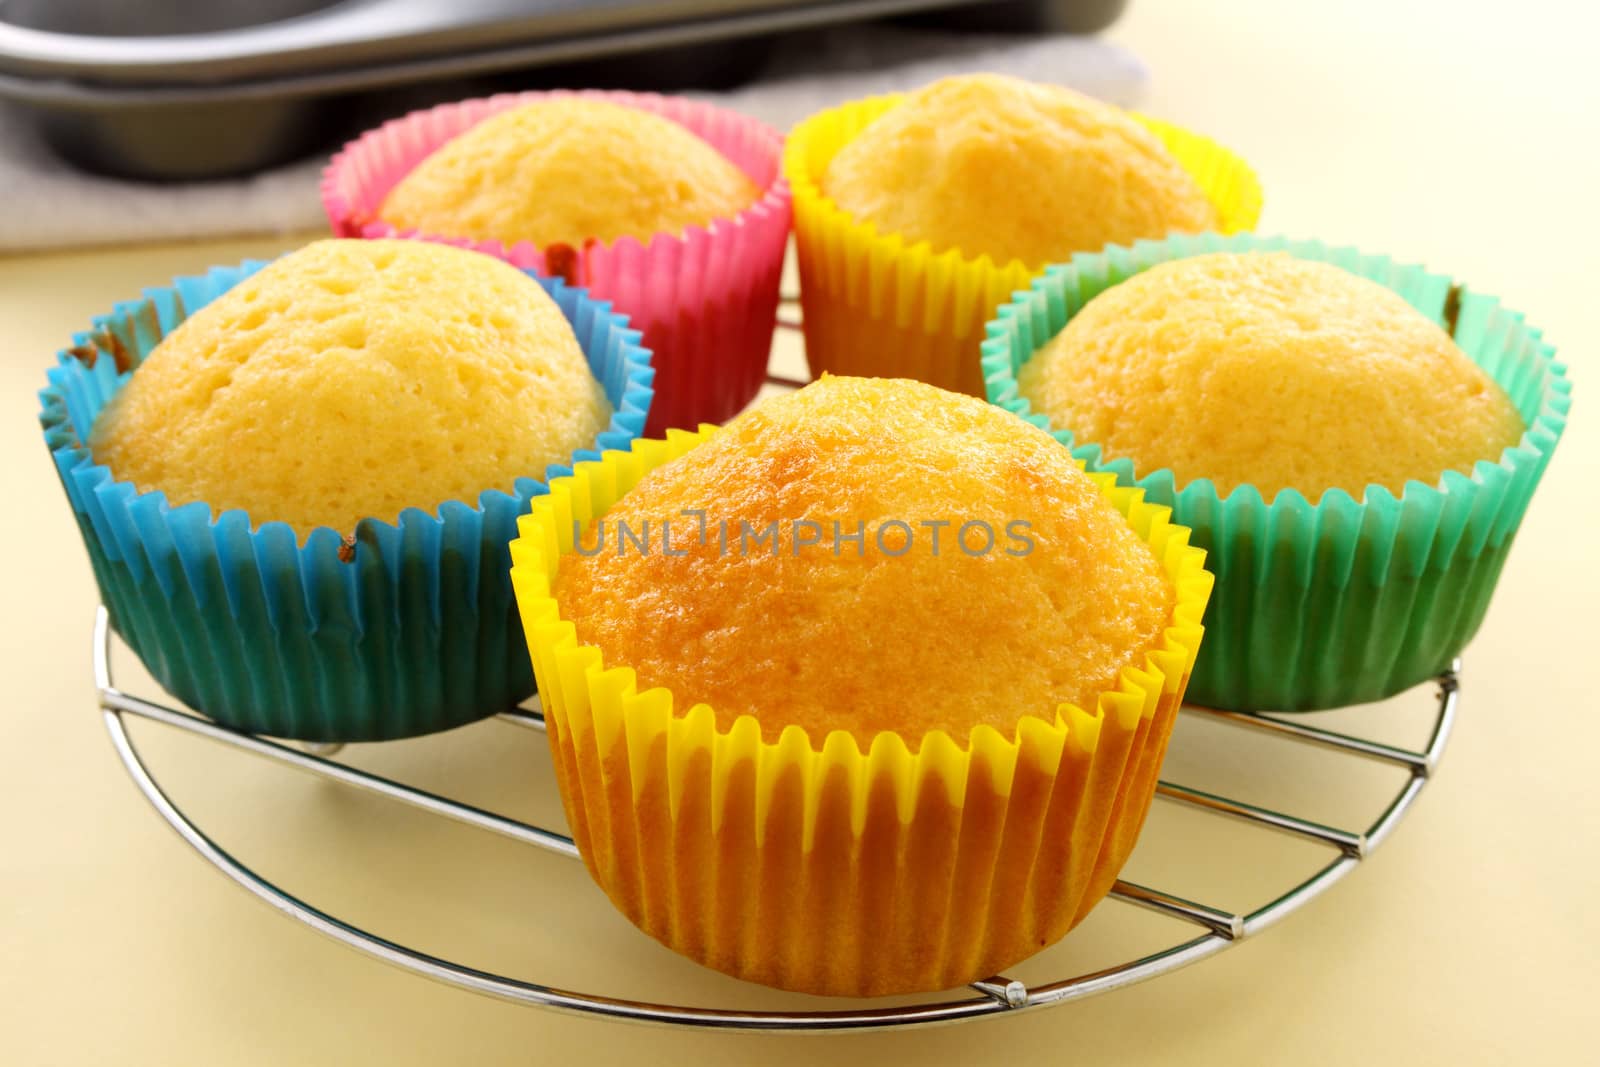 Baked Cup Cakes by jabiru